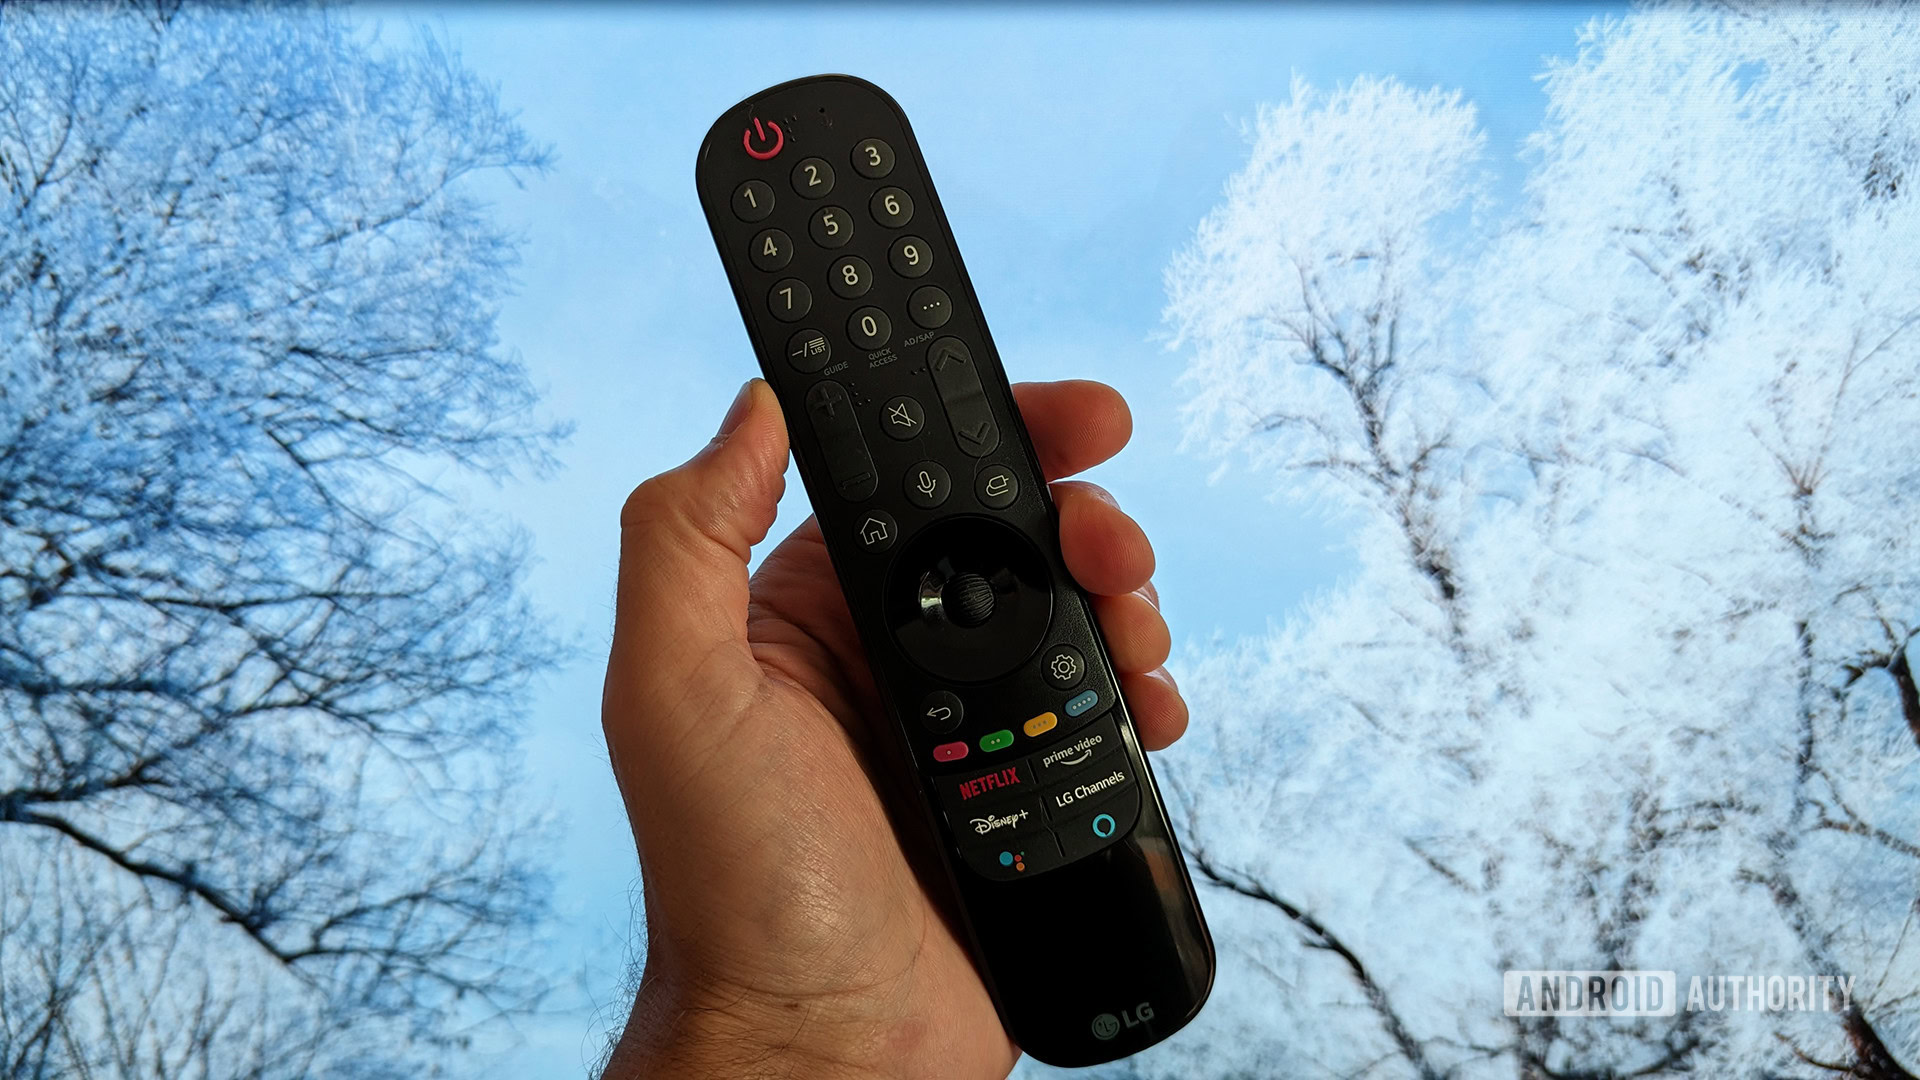 NFC-Enabled Remotes : lg magic remote